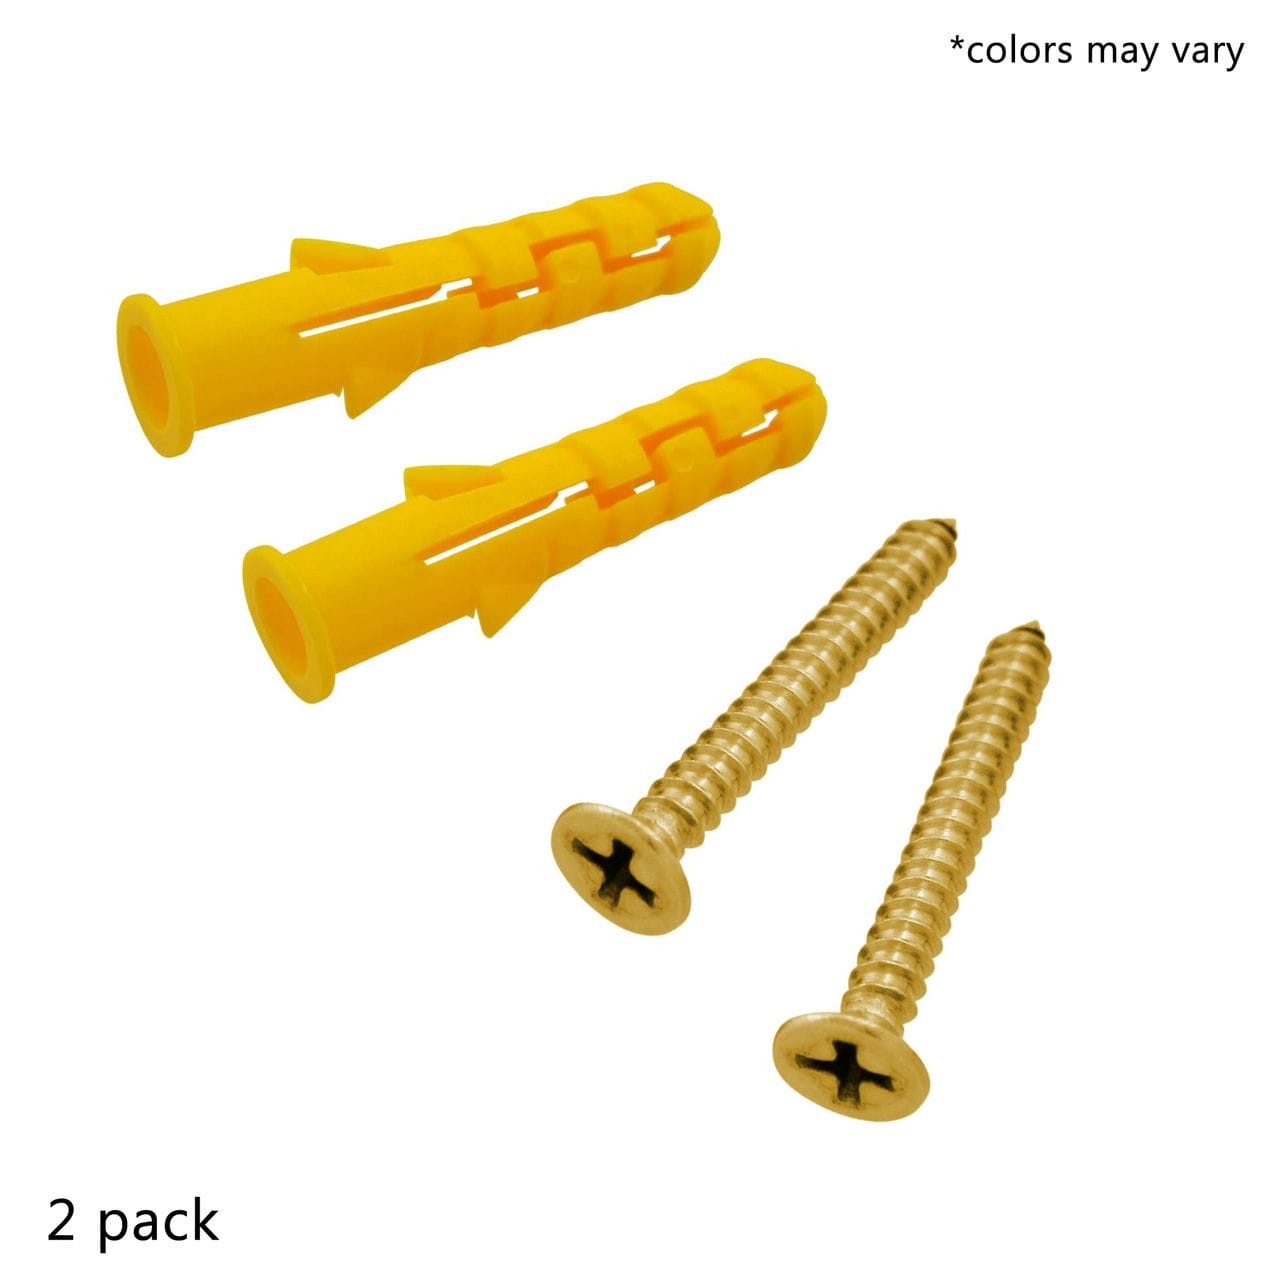 Screws with Drywall Anchors 2 Pack Sign Holder Accessories Hardware